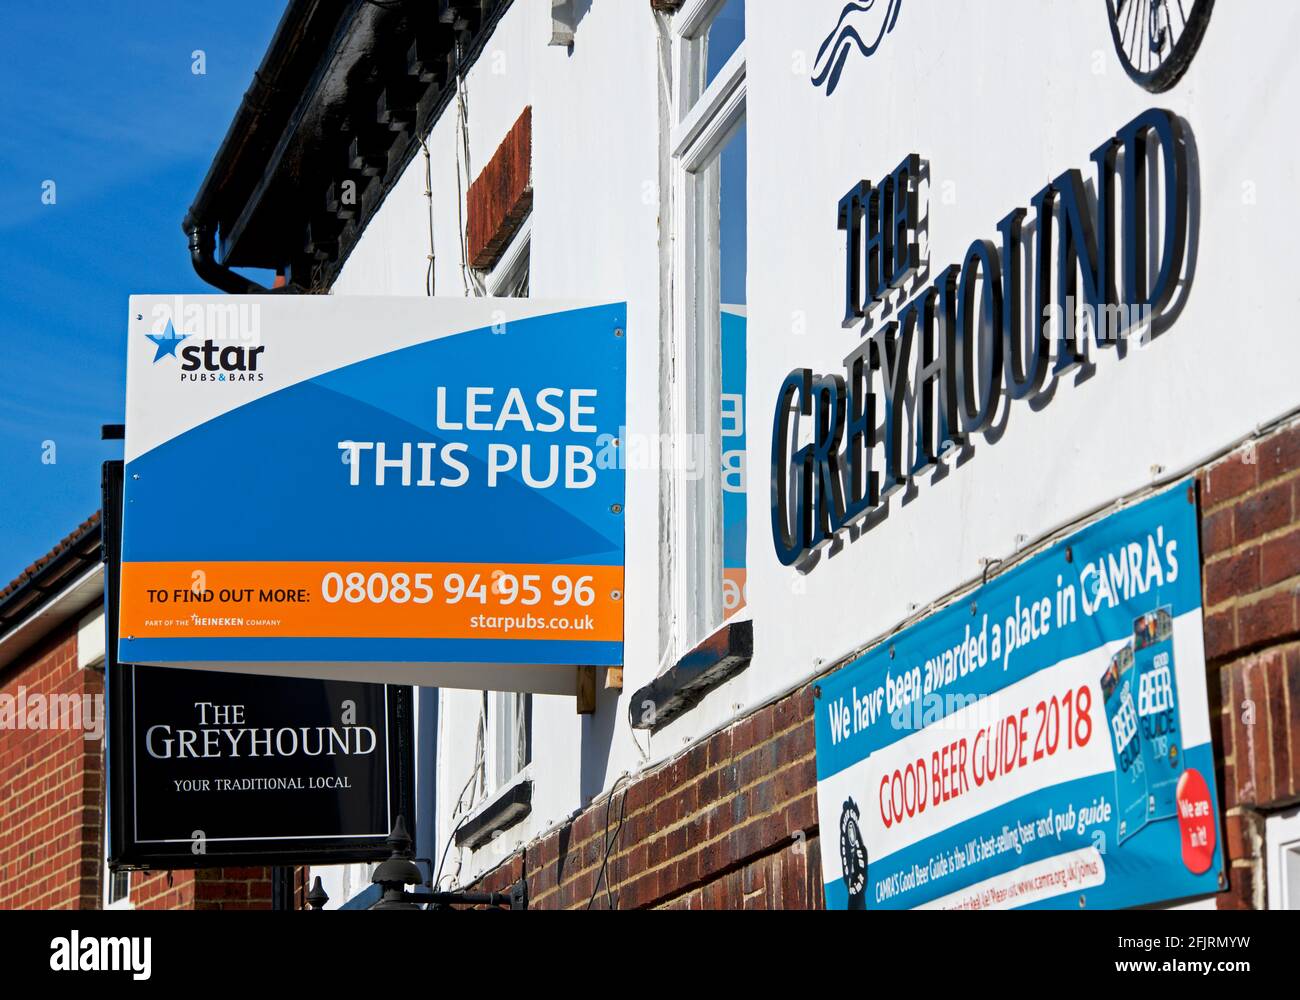 The Greyhound pub, in the village of Riccall, with a sign - Lease this pub - North Yorkshire, England UK Stock Photo